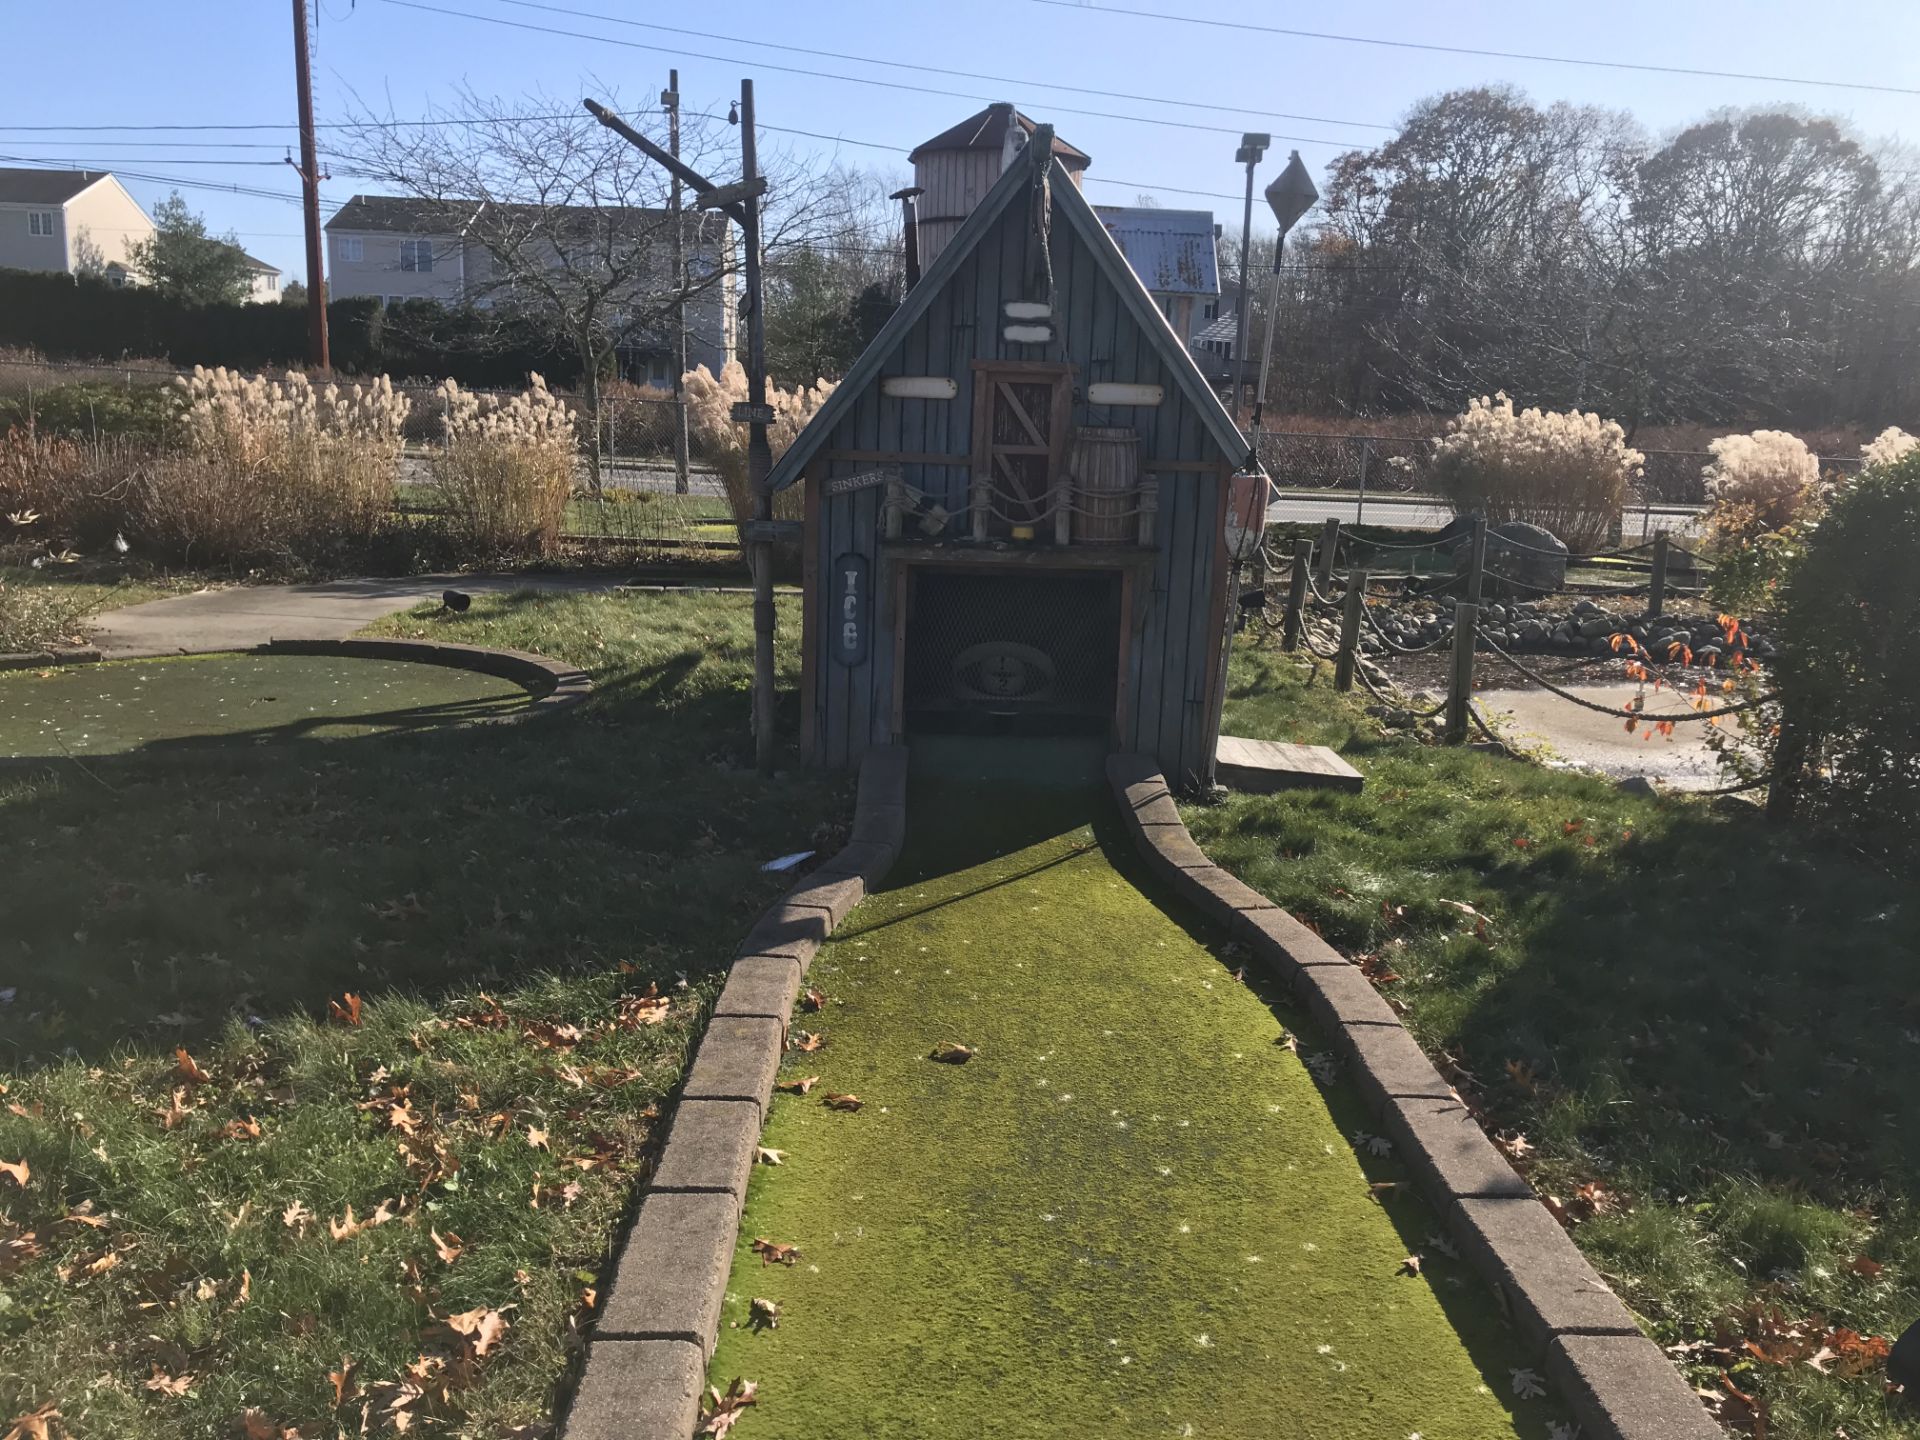 18 Hole Mini Golf Course w/Props, Lights, Railings, Etc. (Take what you want, leave what you want) - Image 4 of 5